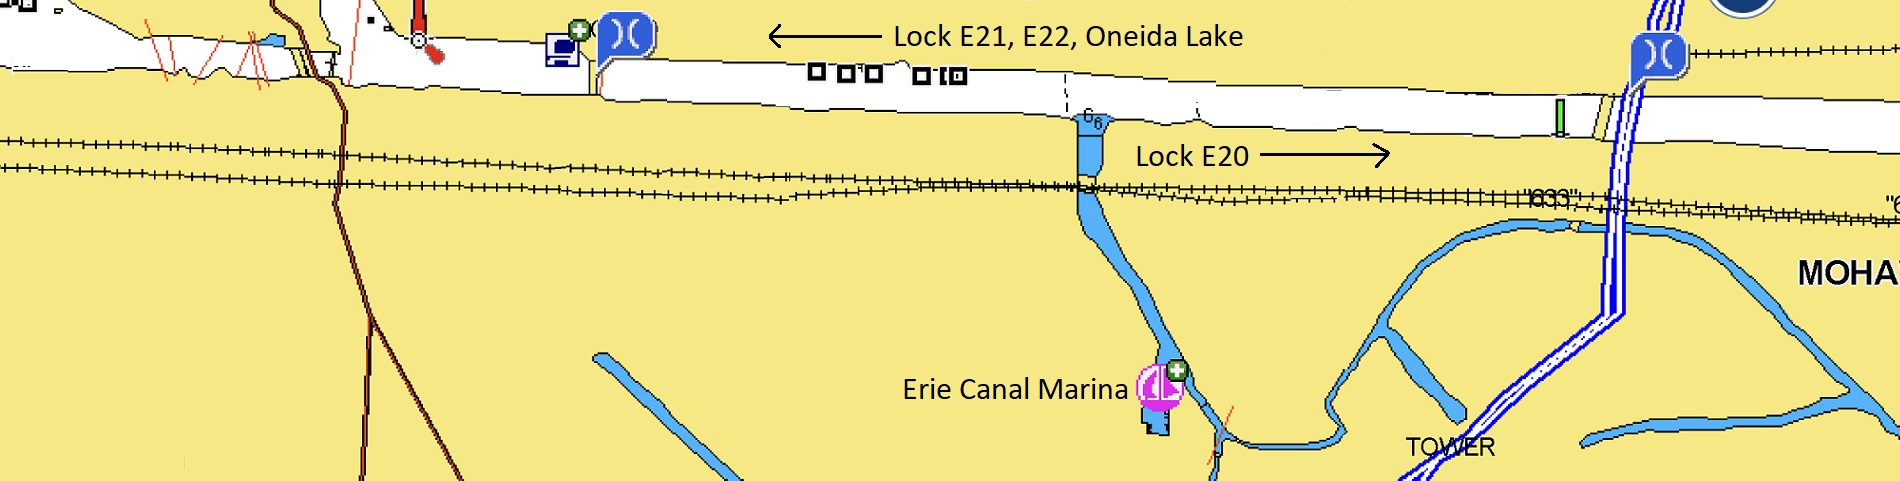 Canal map of Erie Canel Marina.